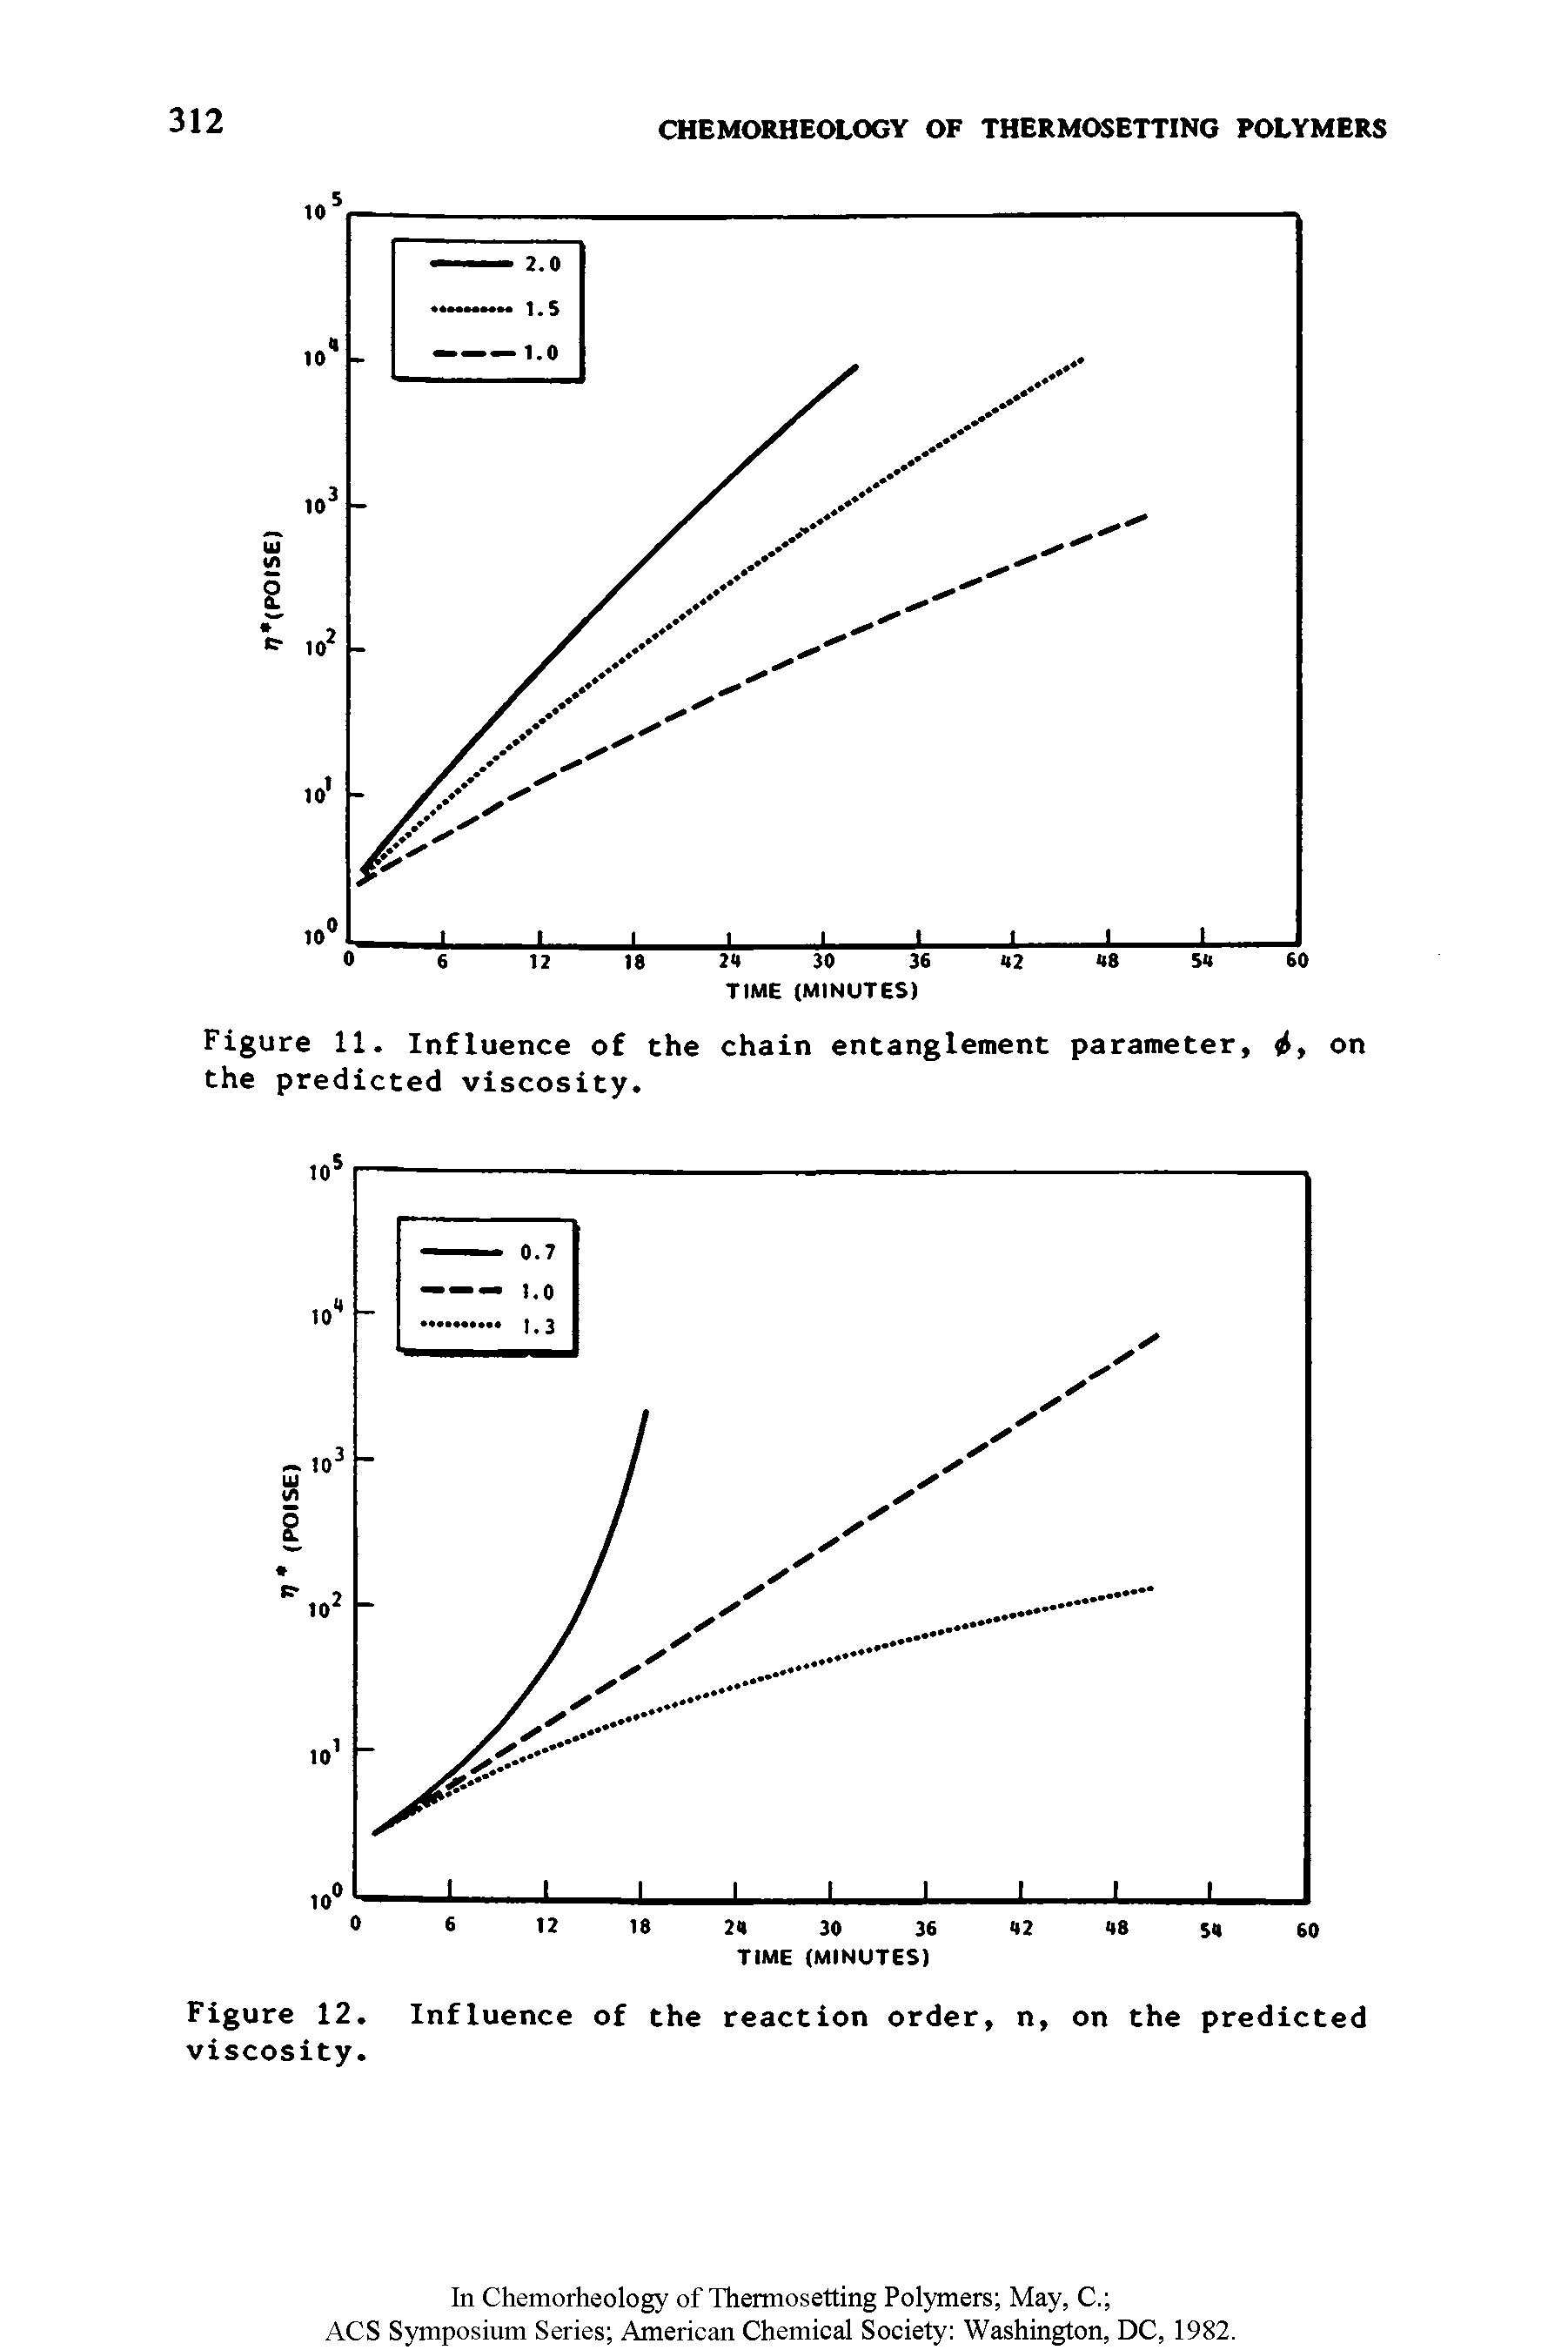 Figure 11. Influence of the chain entanglement parameter, on the predicted viscosity.